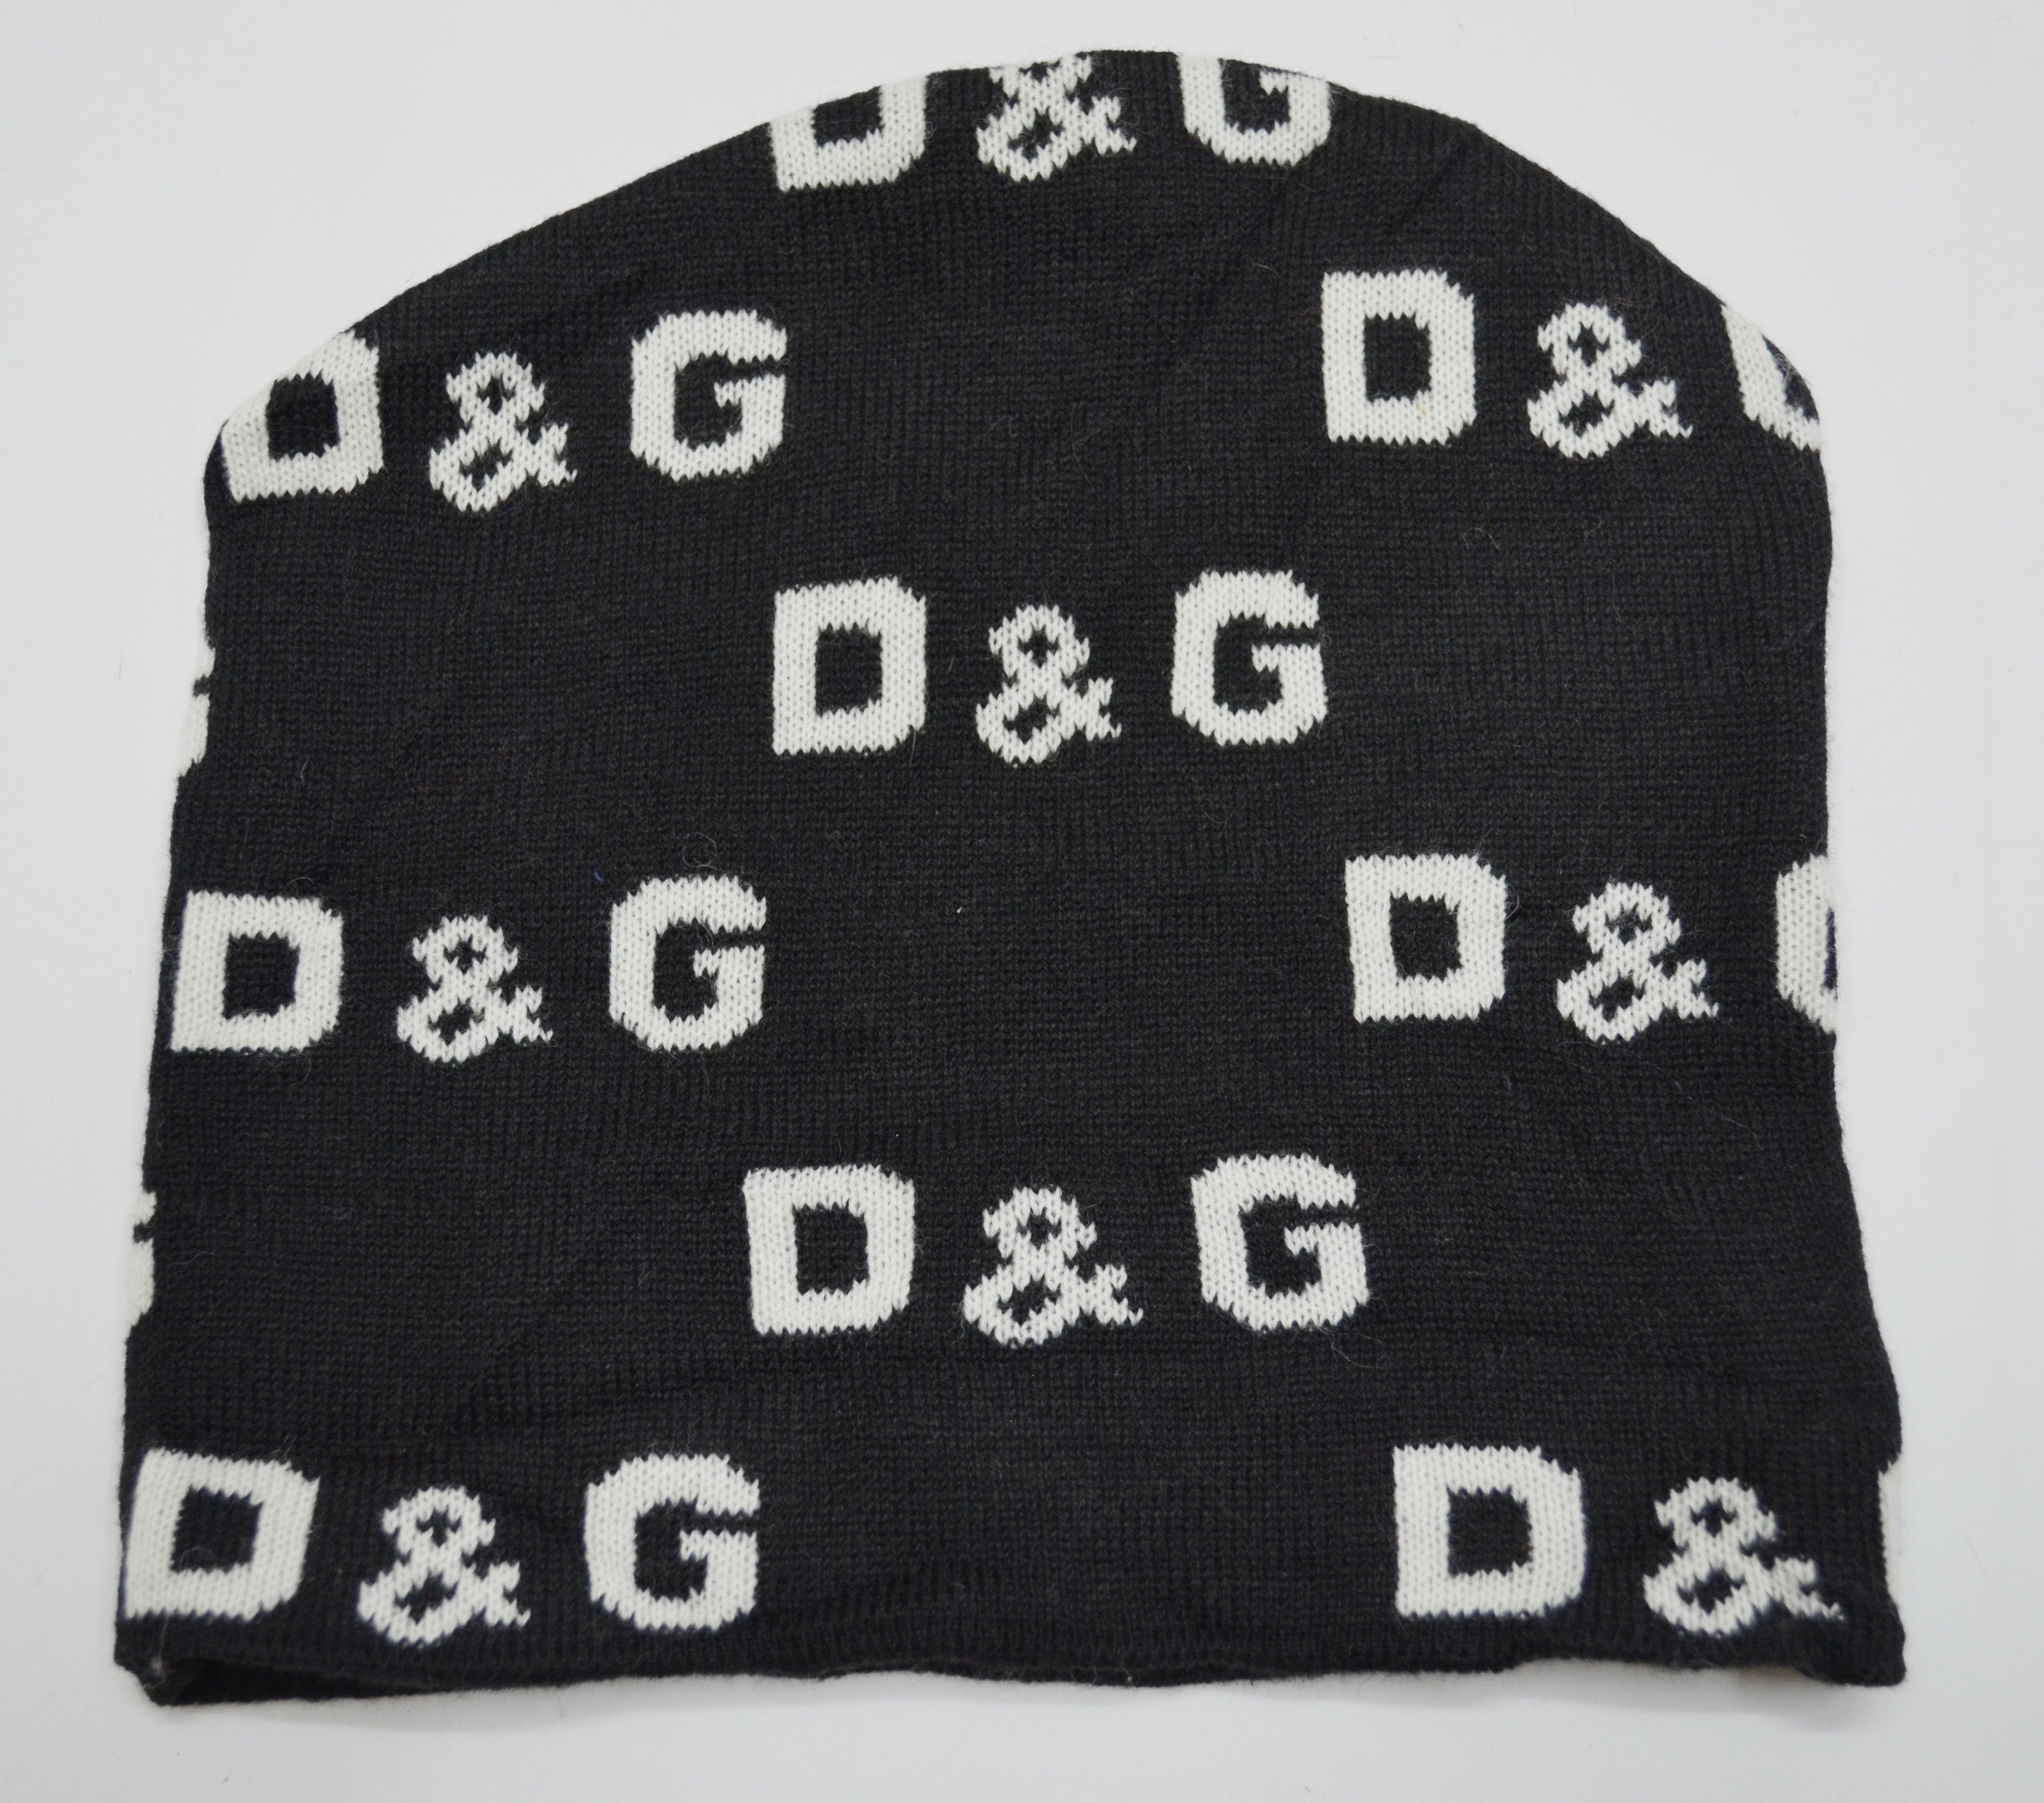 Dolce & Gabbana D&G Monogram Wool Acrylic Beanie Hats Made In Italy Size ONE SIZE - 7 Thumbnail